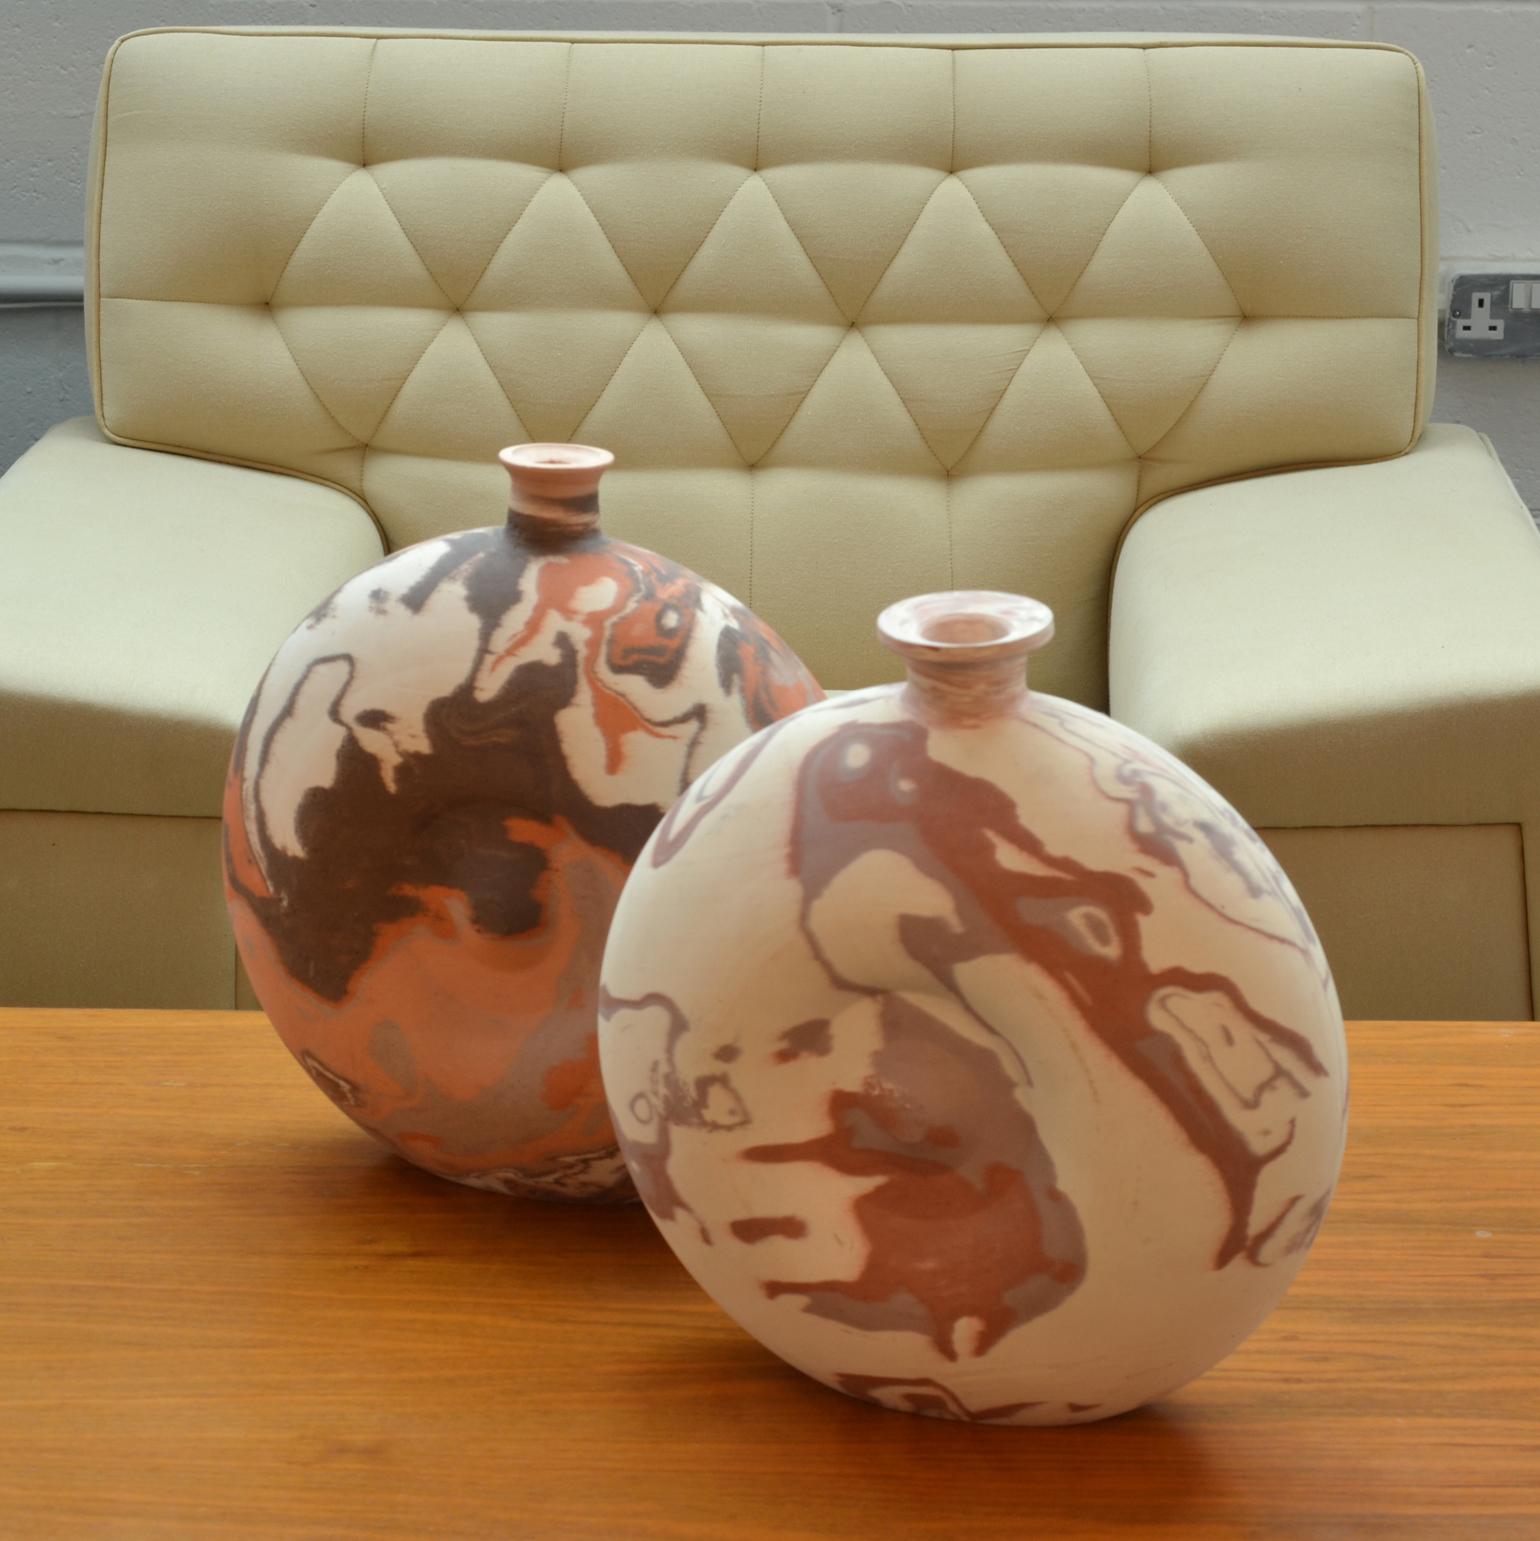 Pair of contemporary Dutch Studio pottery vases with marbled decoration in original clay colors with earth tones by Hans Naus, signed H.N. '07 no. 8/15.
The vases are hand pressed into the mold with three different colors clay mixed to create that